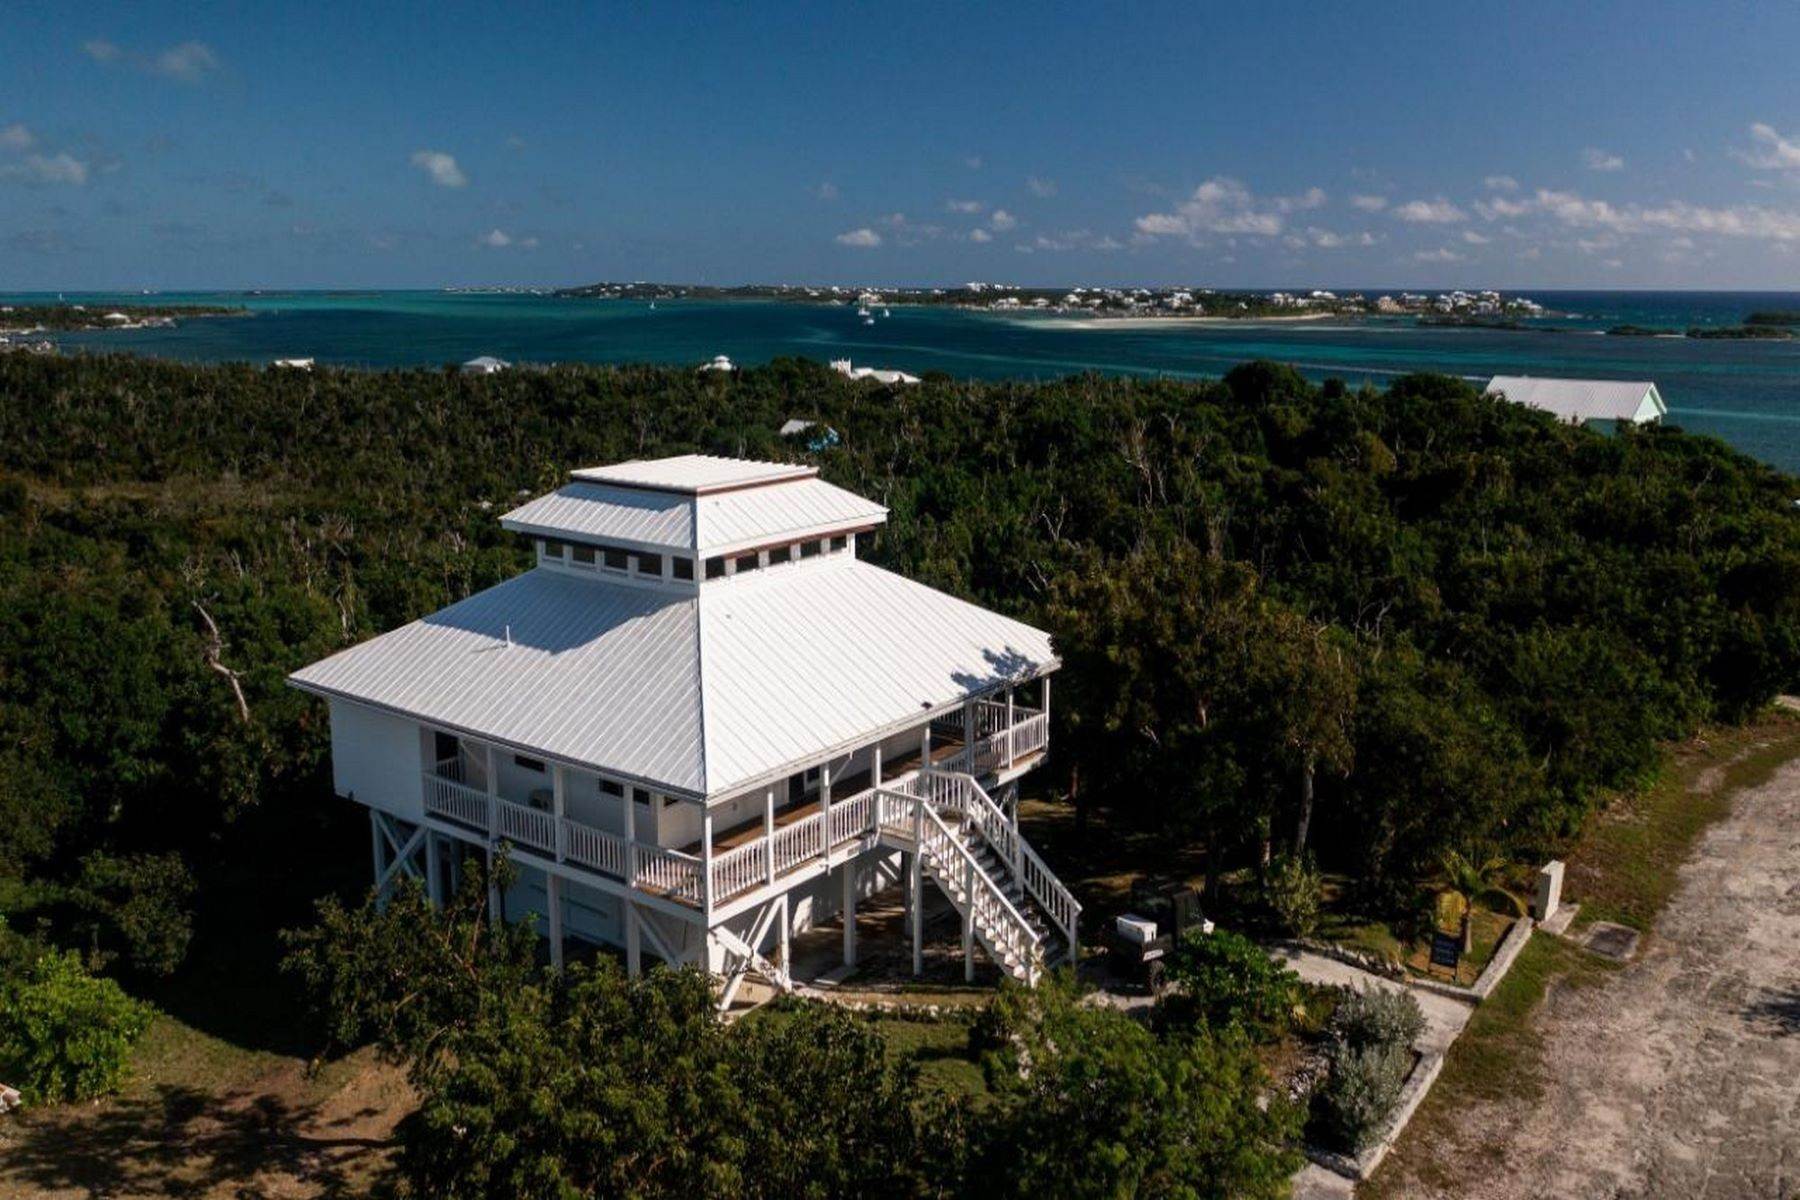 Single Family Homes for Sale at Abaco Ocean Club, Lubbers Quarters, Abaco, Bahamas